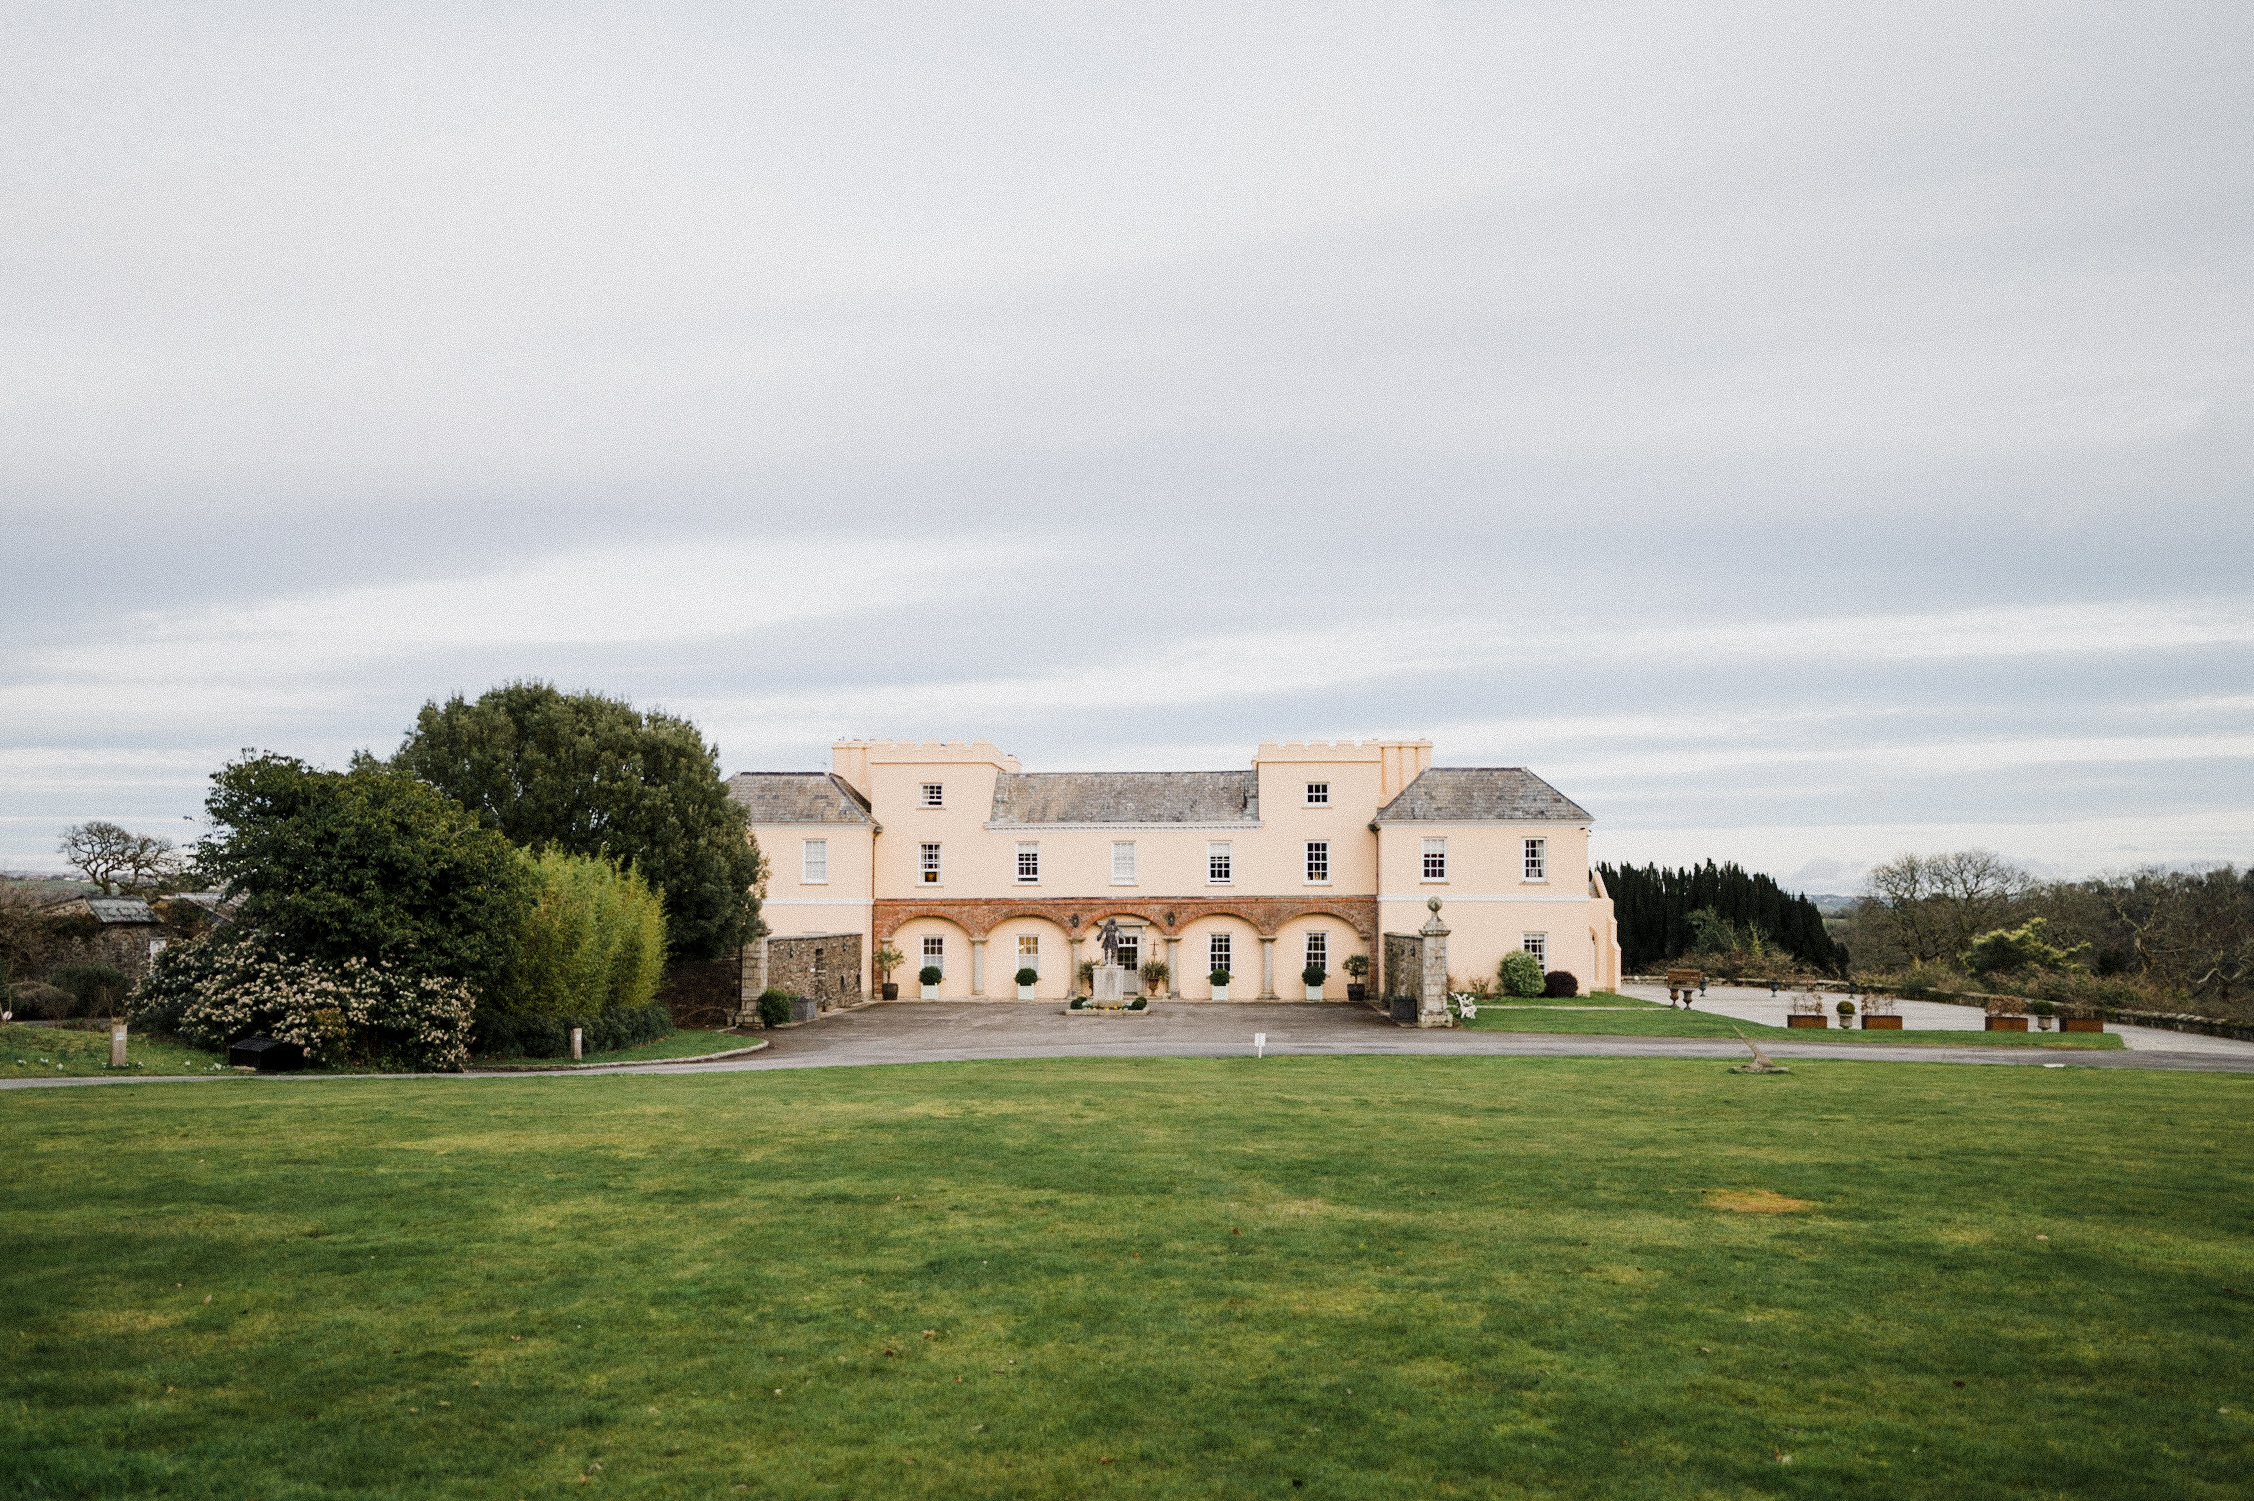 Pentillie Castle Entrance captured by Cornwall Wedding Photographer Liberty Pearl